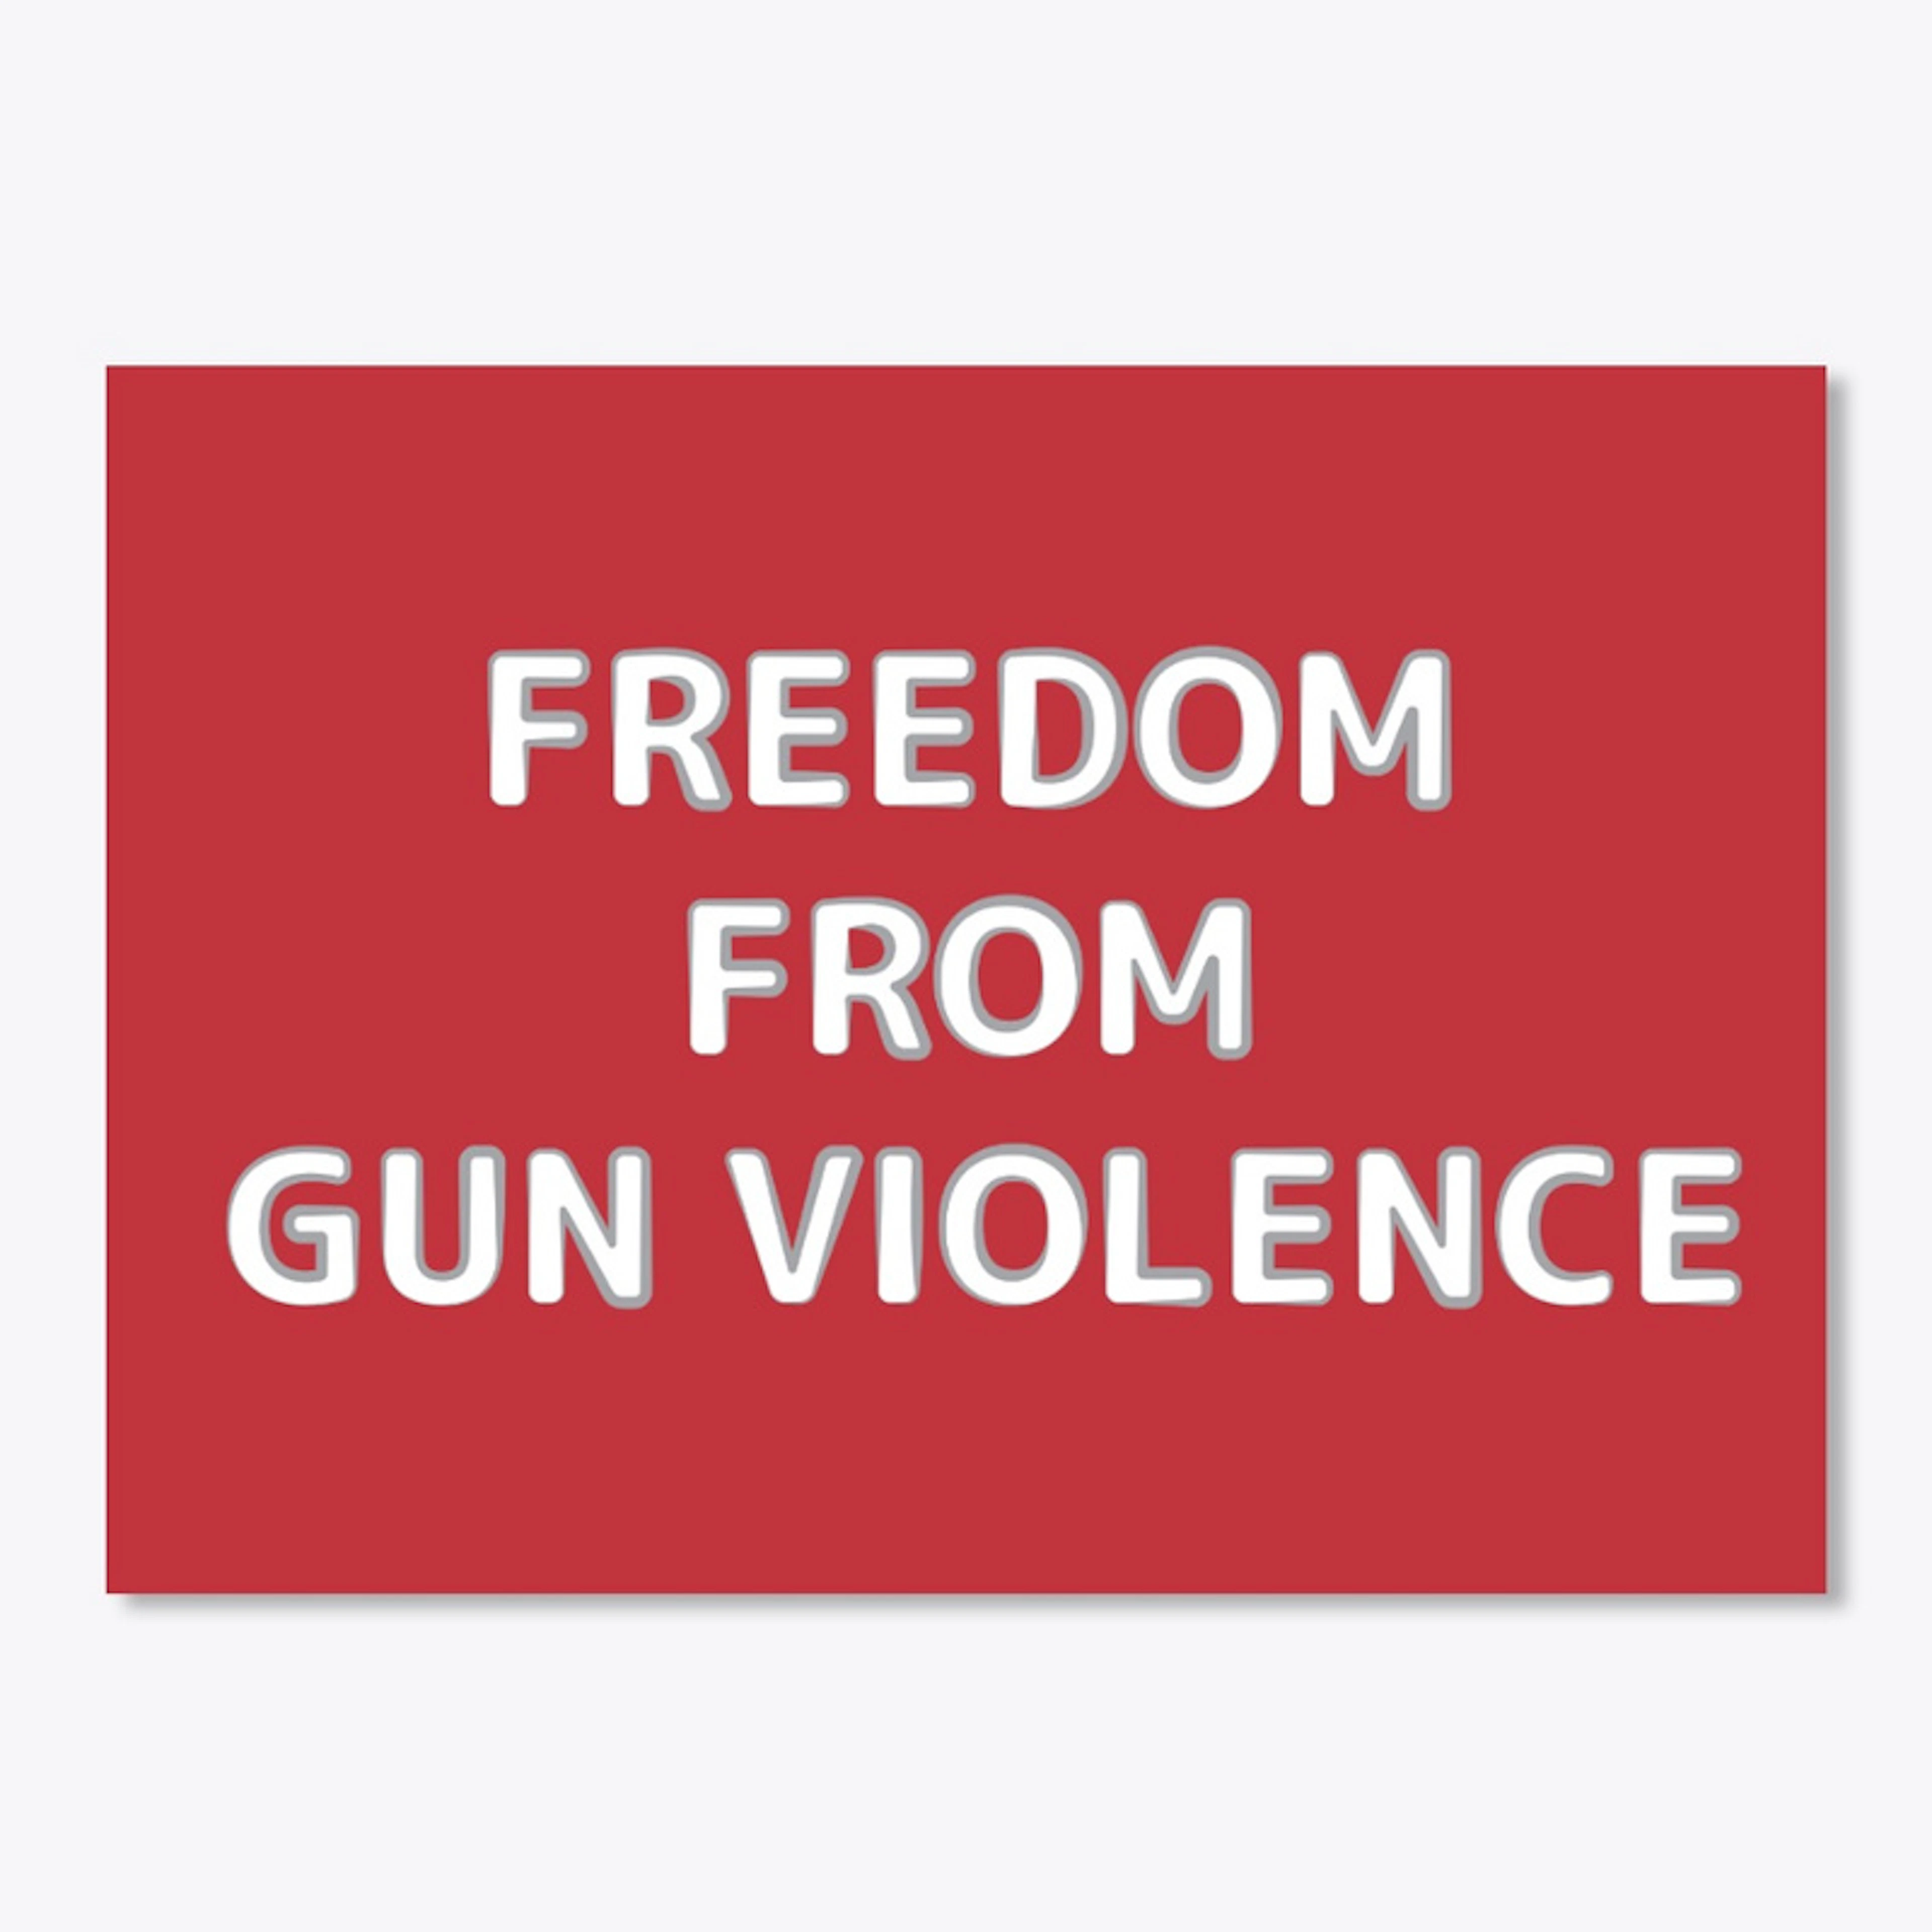 Freedom from Gun Violence (WHT TXT)